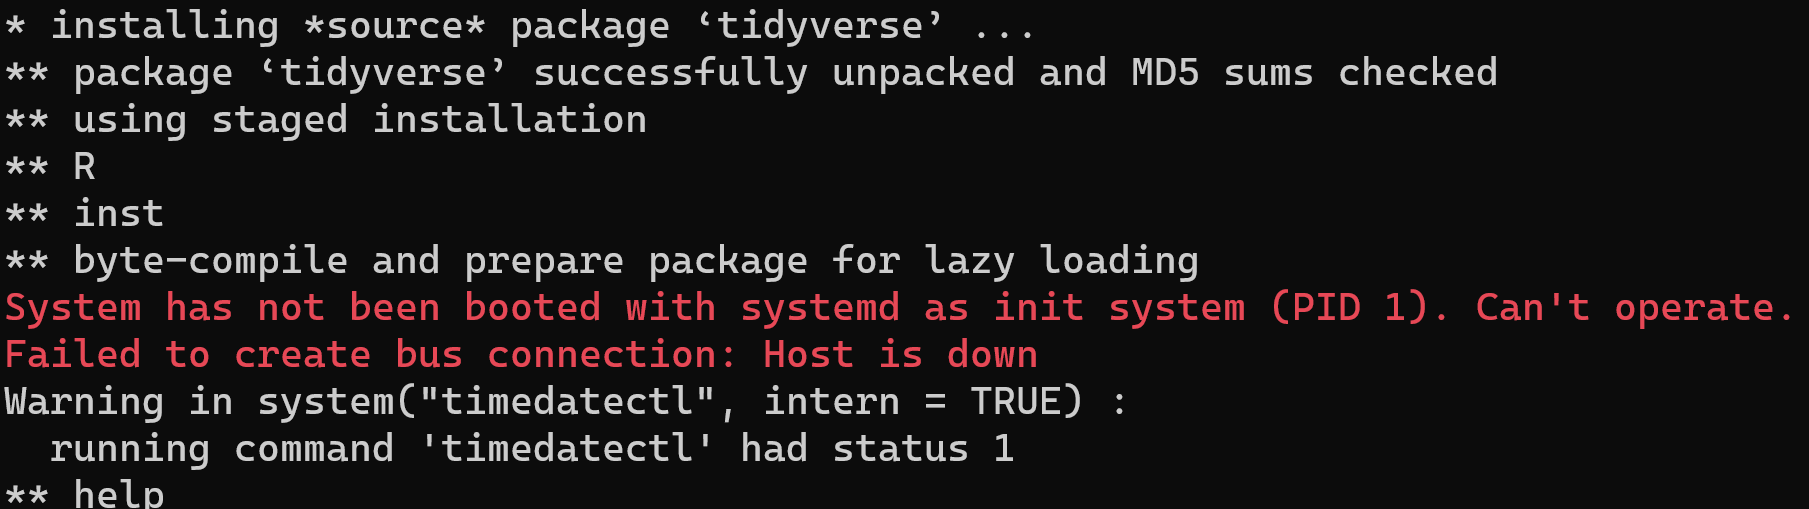 Installing Tidyverse in WSL without Timedatectl Status 1 Issue